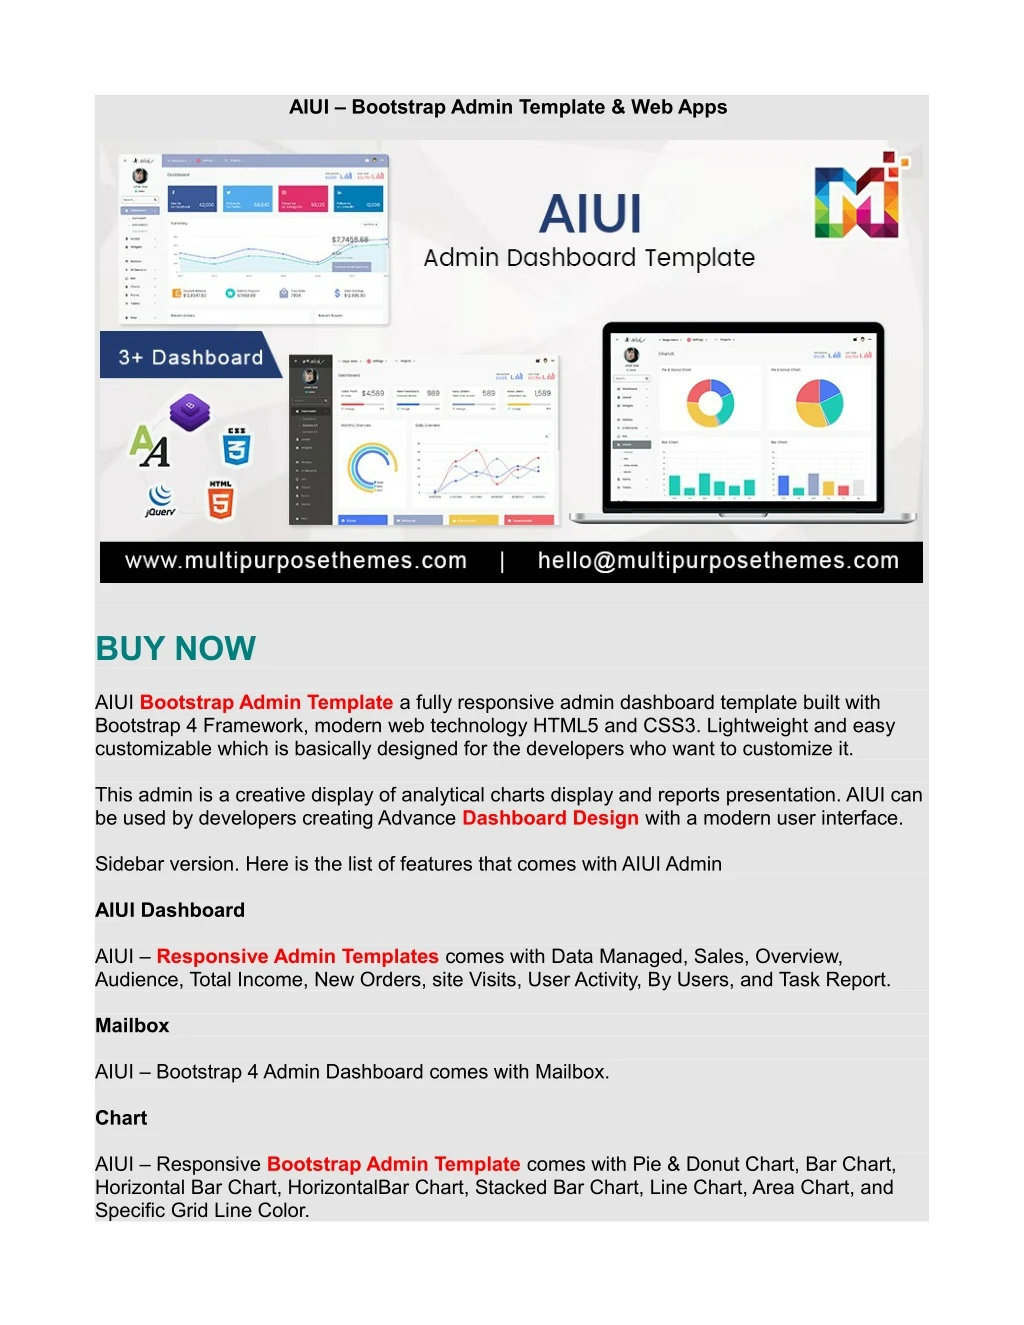 aiui bootstrap admin template web apps